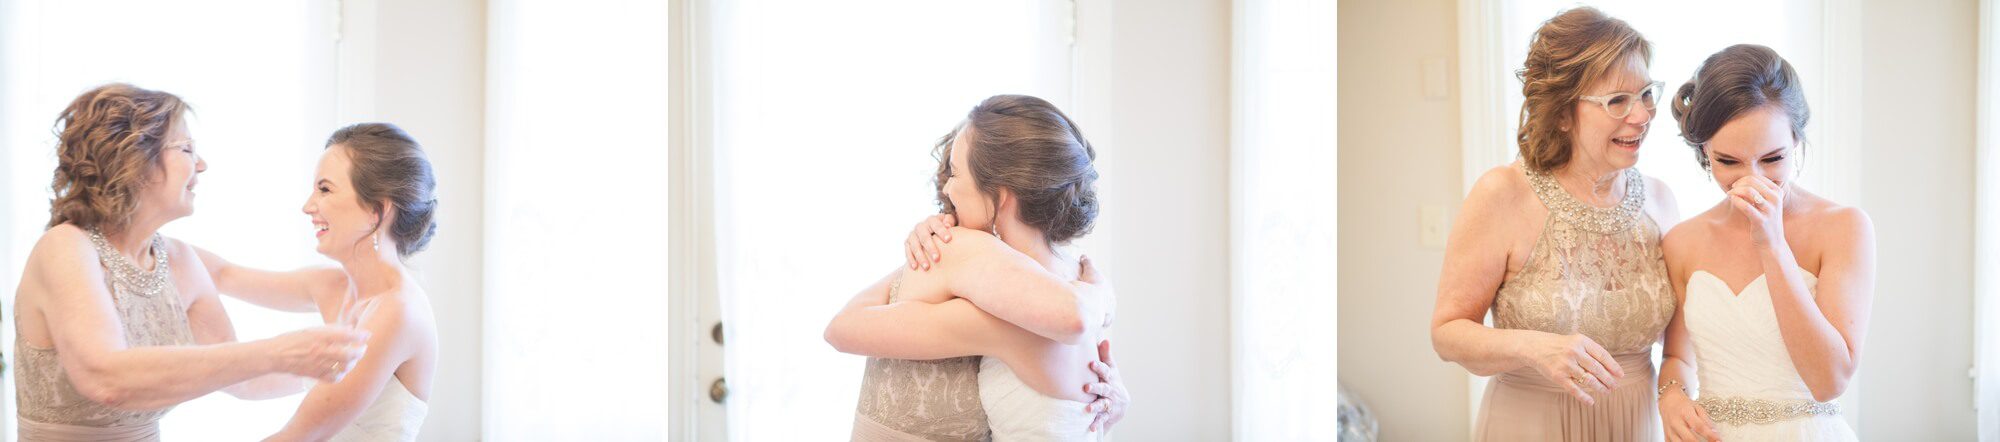 Emotional moment between mom and daughter. Spring wedding at Cedarwood Weddings in Nashville, TN. Photo by Krista Lee Photography, from Sam and Izzy's wedding day.